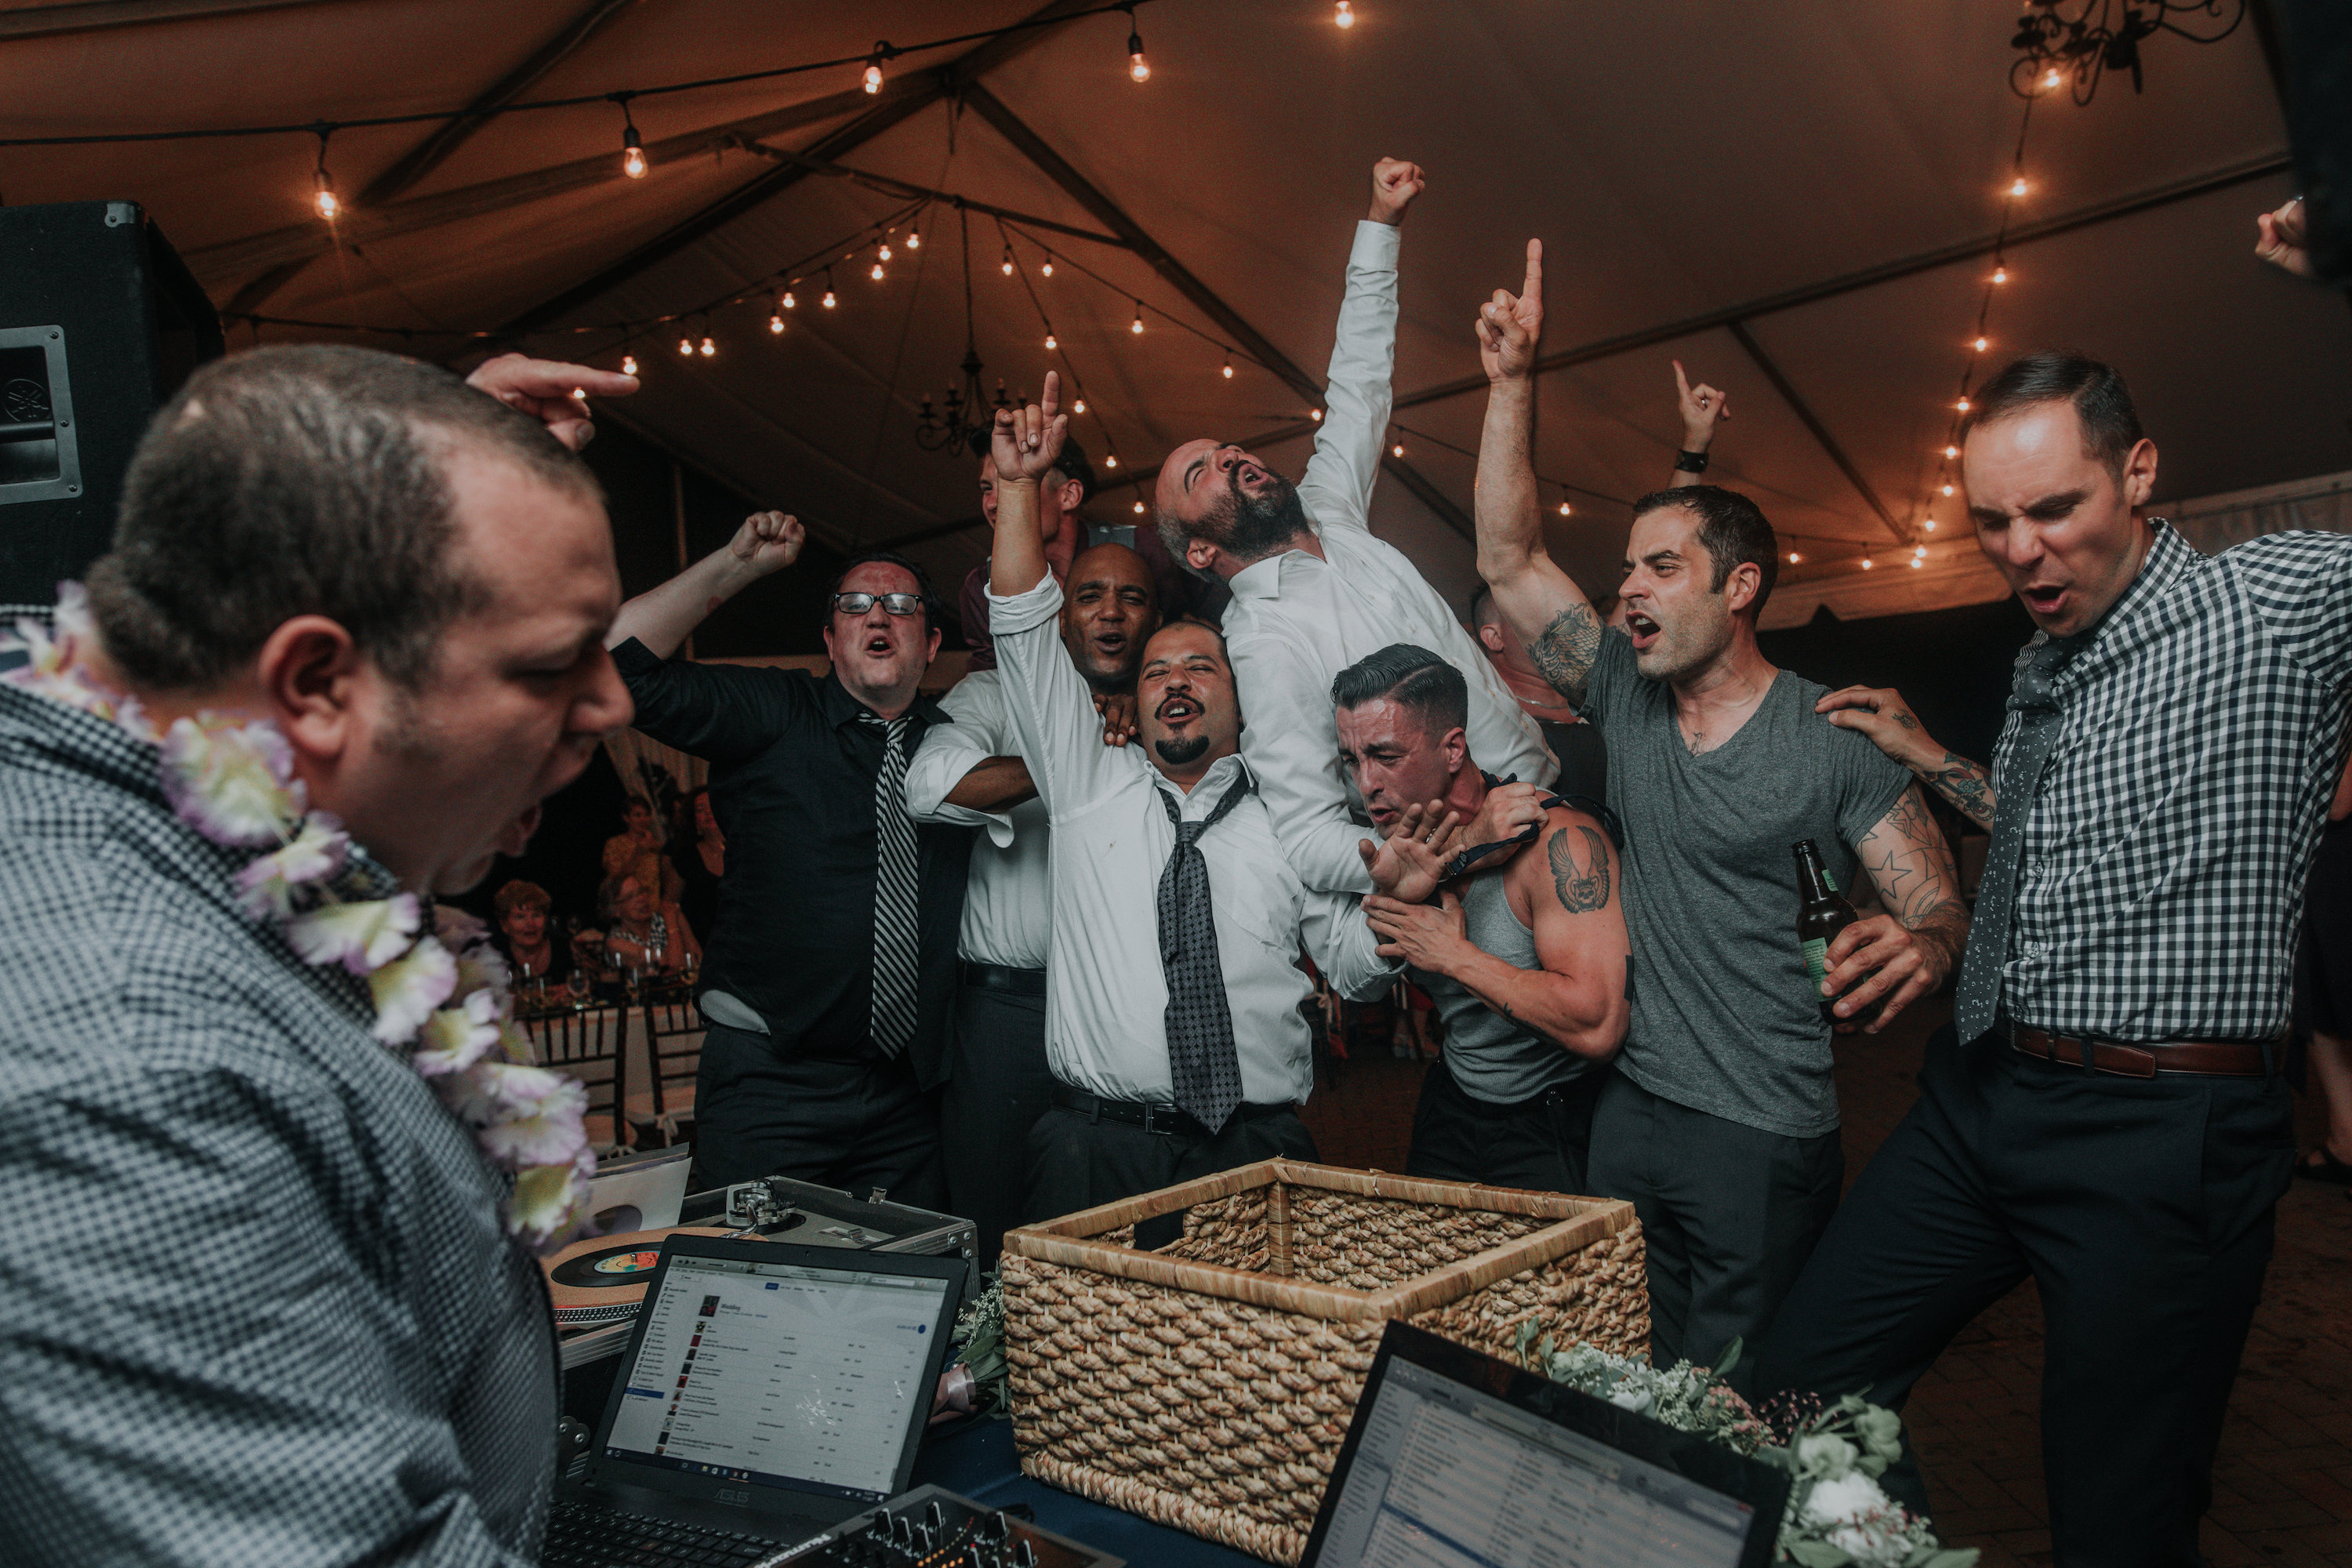  A group of sweaty men dance with 1 finger in the air during a wedding reception.